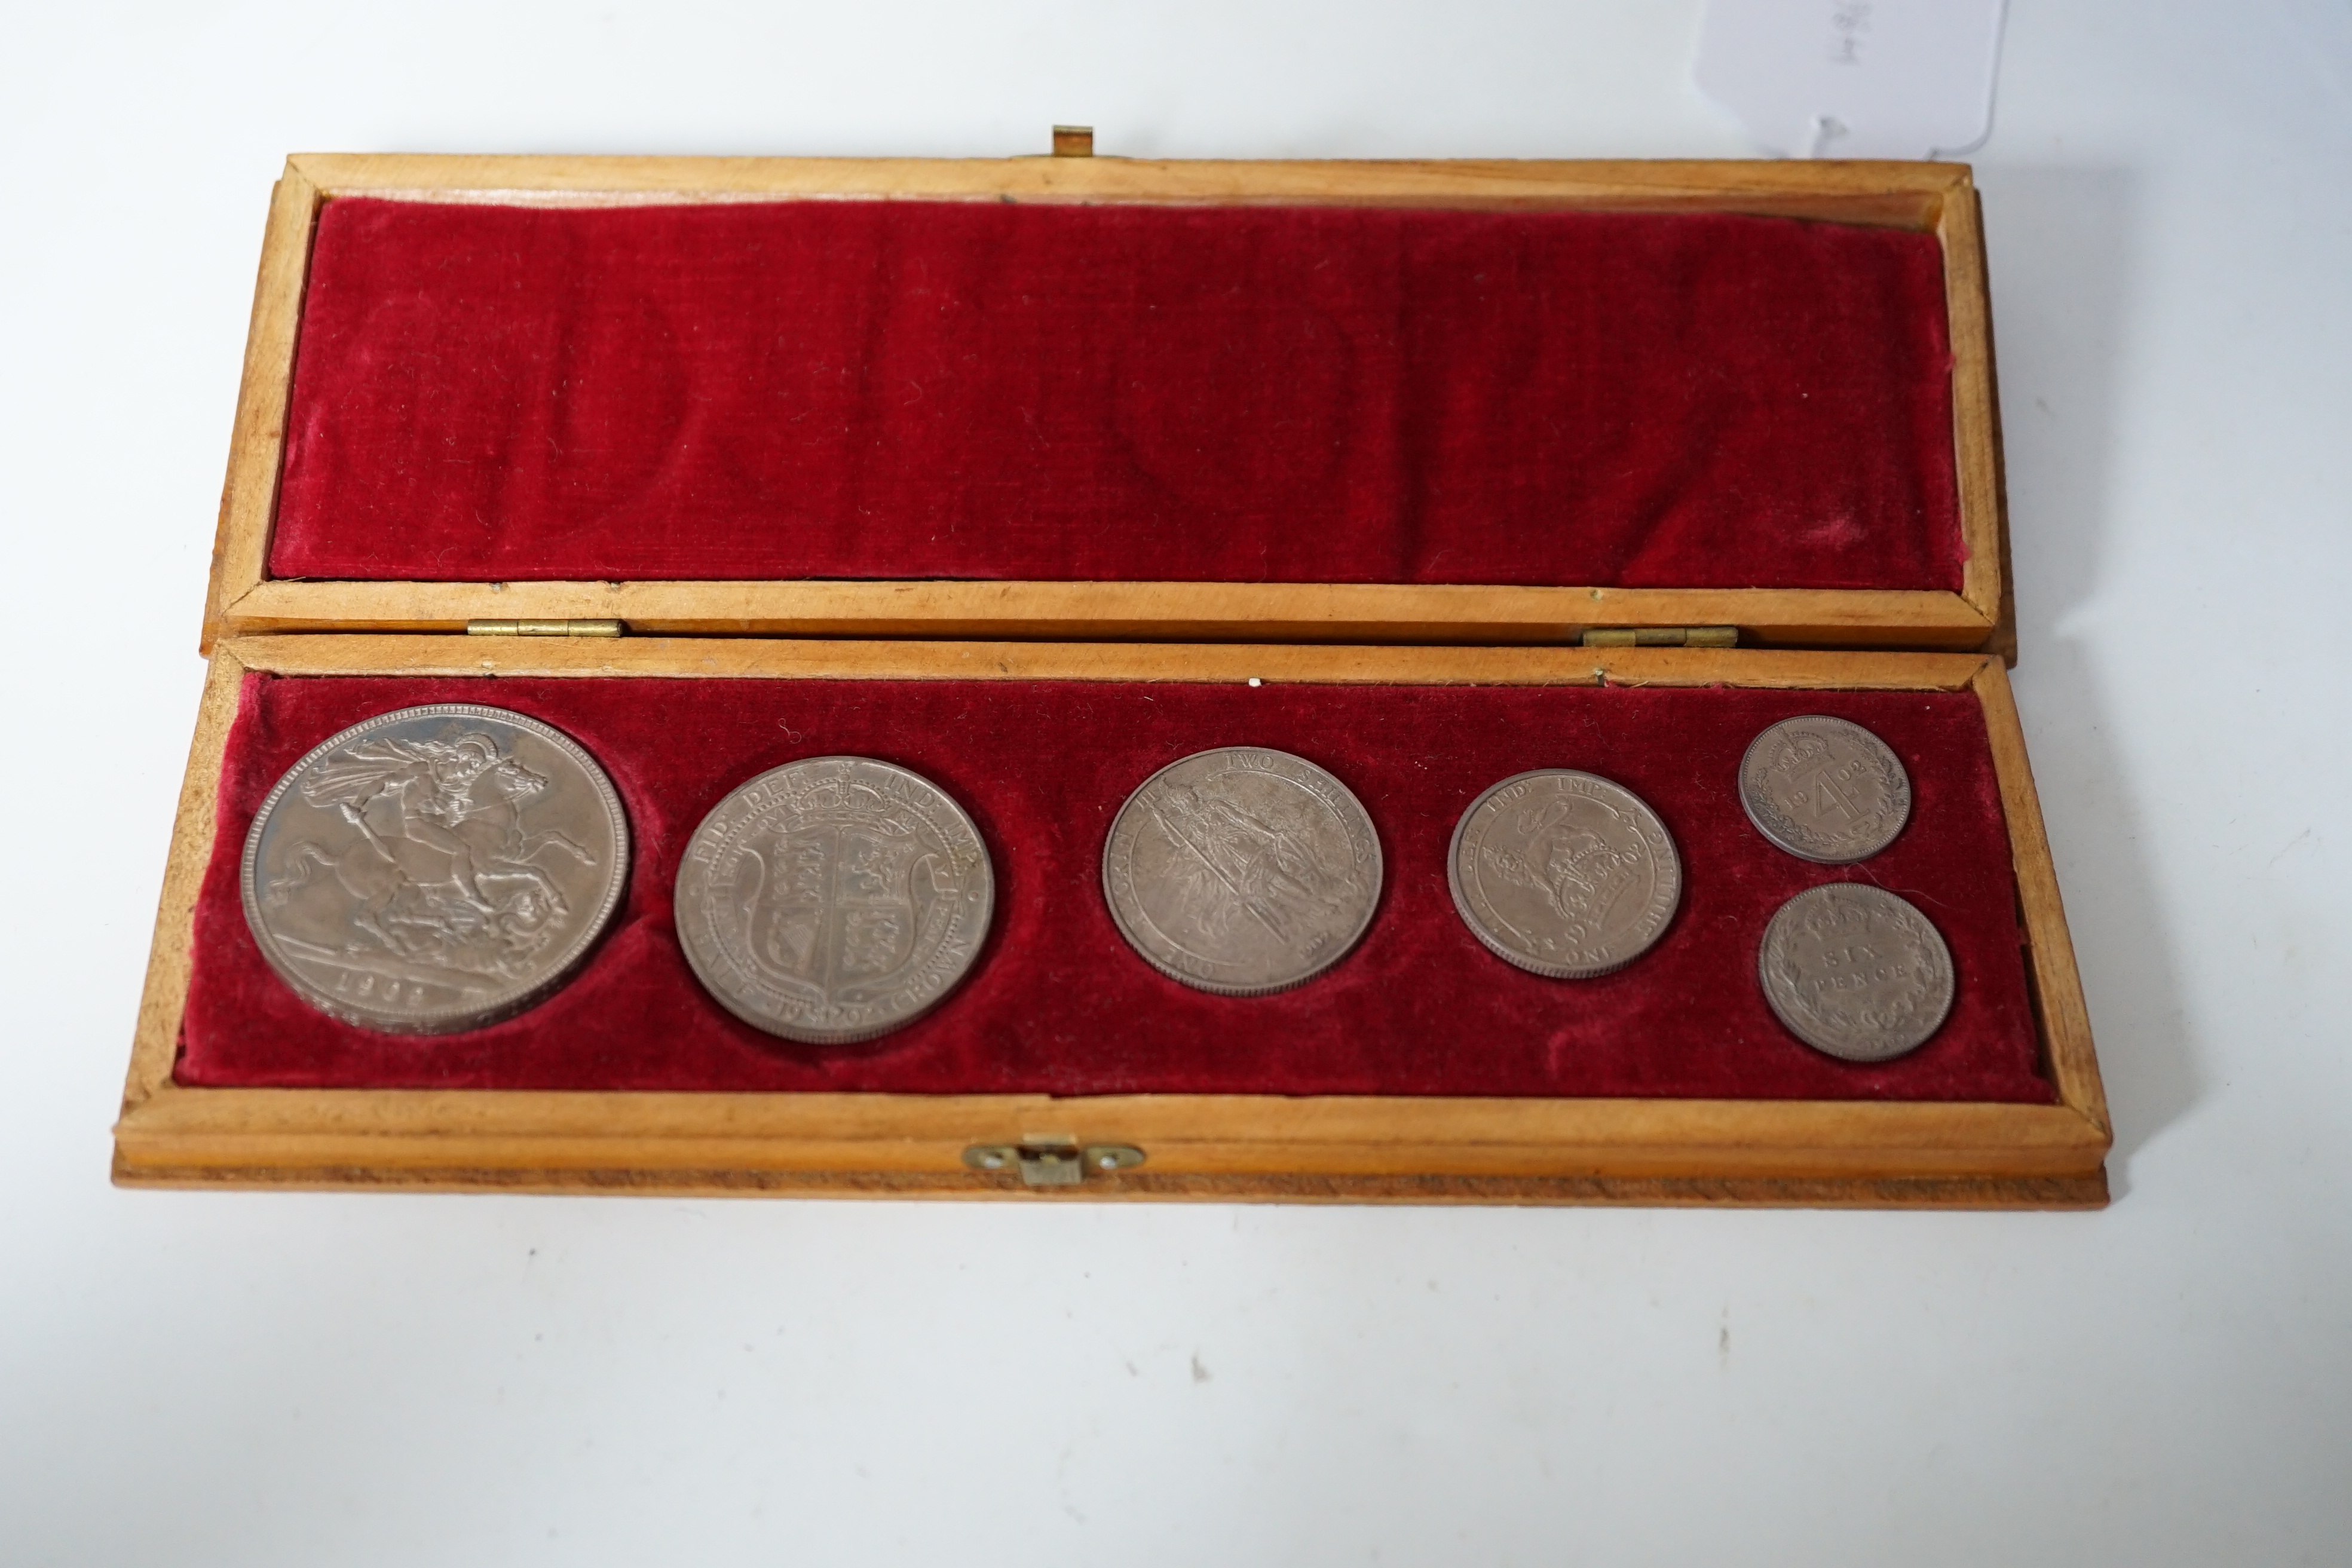 British silver proof coins, 1902 Edward VII matt proof six coin set ranging from crown to sixpence and a maundy fourpence, dark toning, associated case